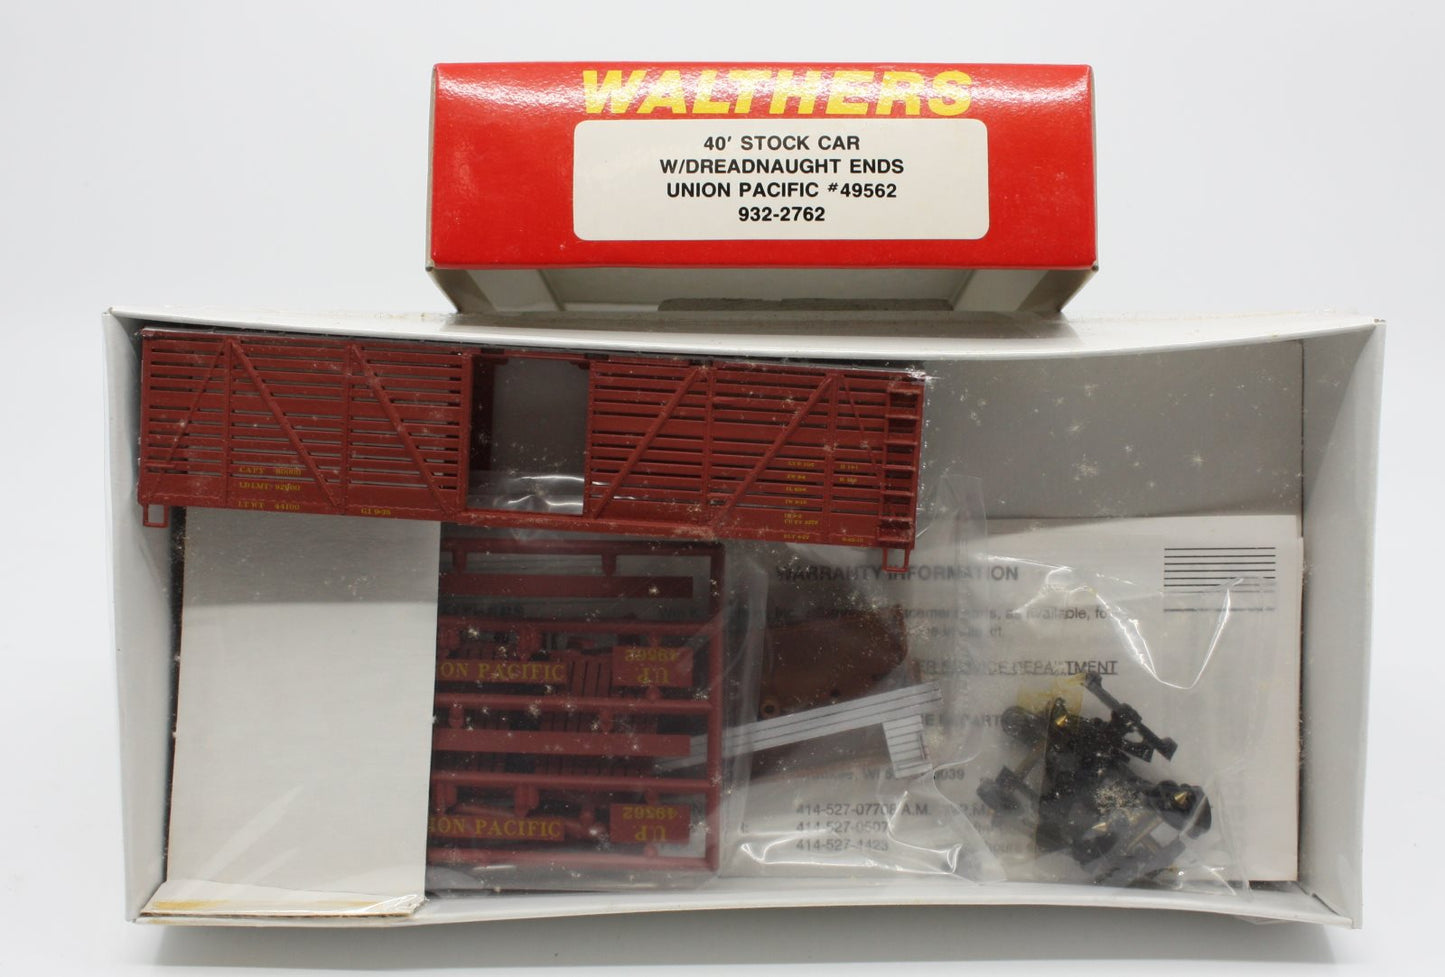 Walthers 932-2762 HO Union Pacific 40' Stock Car with Dreadnaught Ends Kit